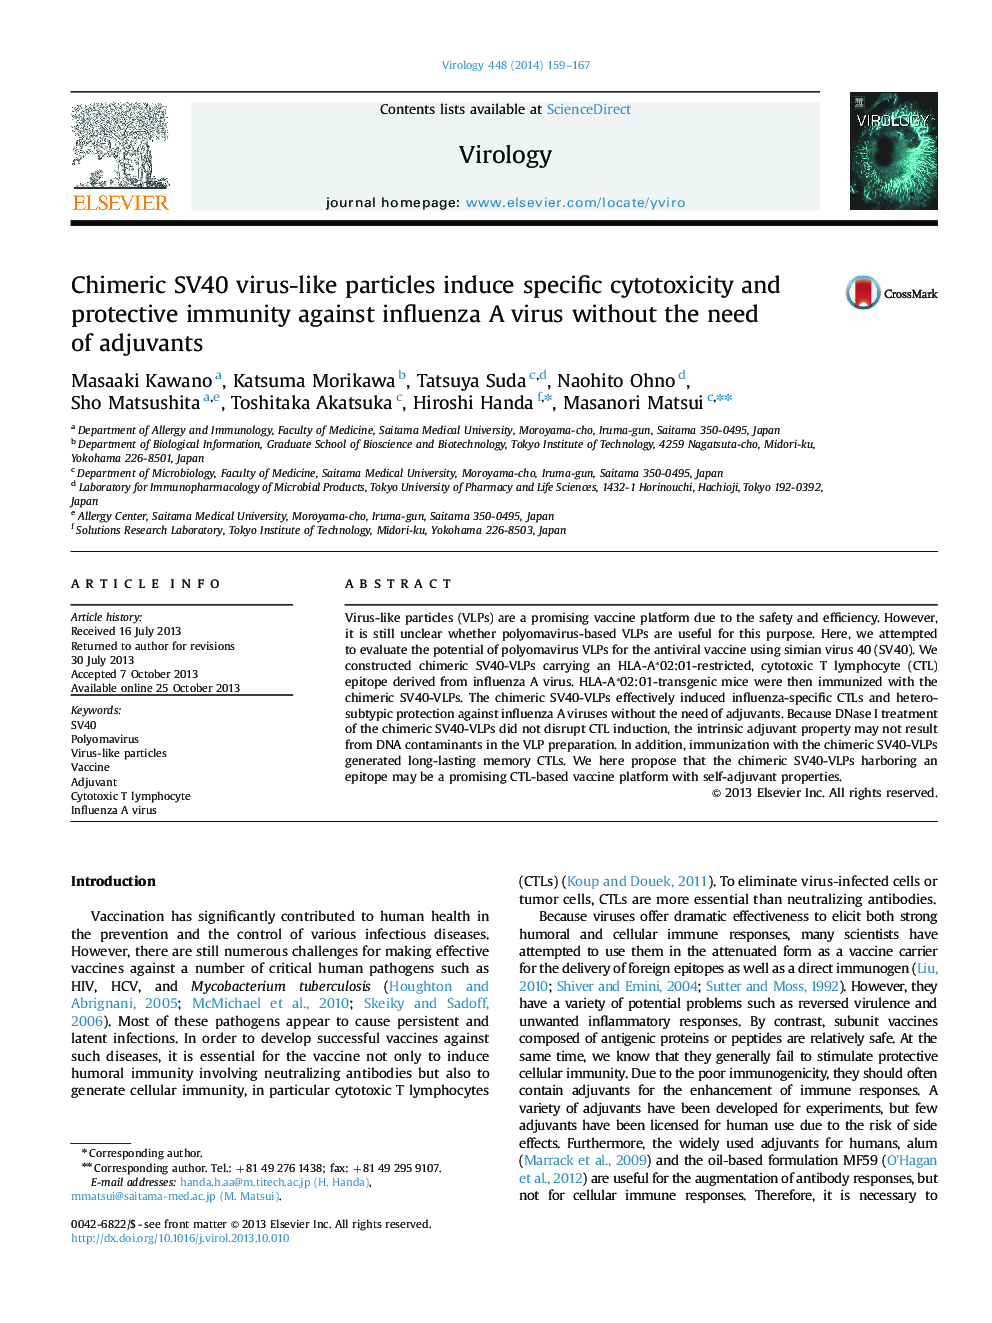 Chimeric SV40 virus-like particles induce specific cytotoxicity and protective immunity against influenza A virus without the need of adjuvants